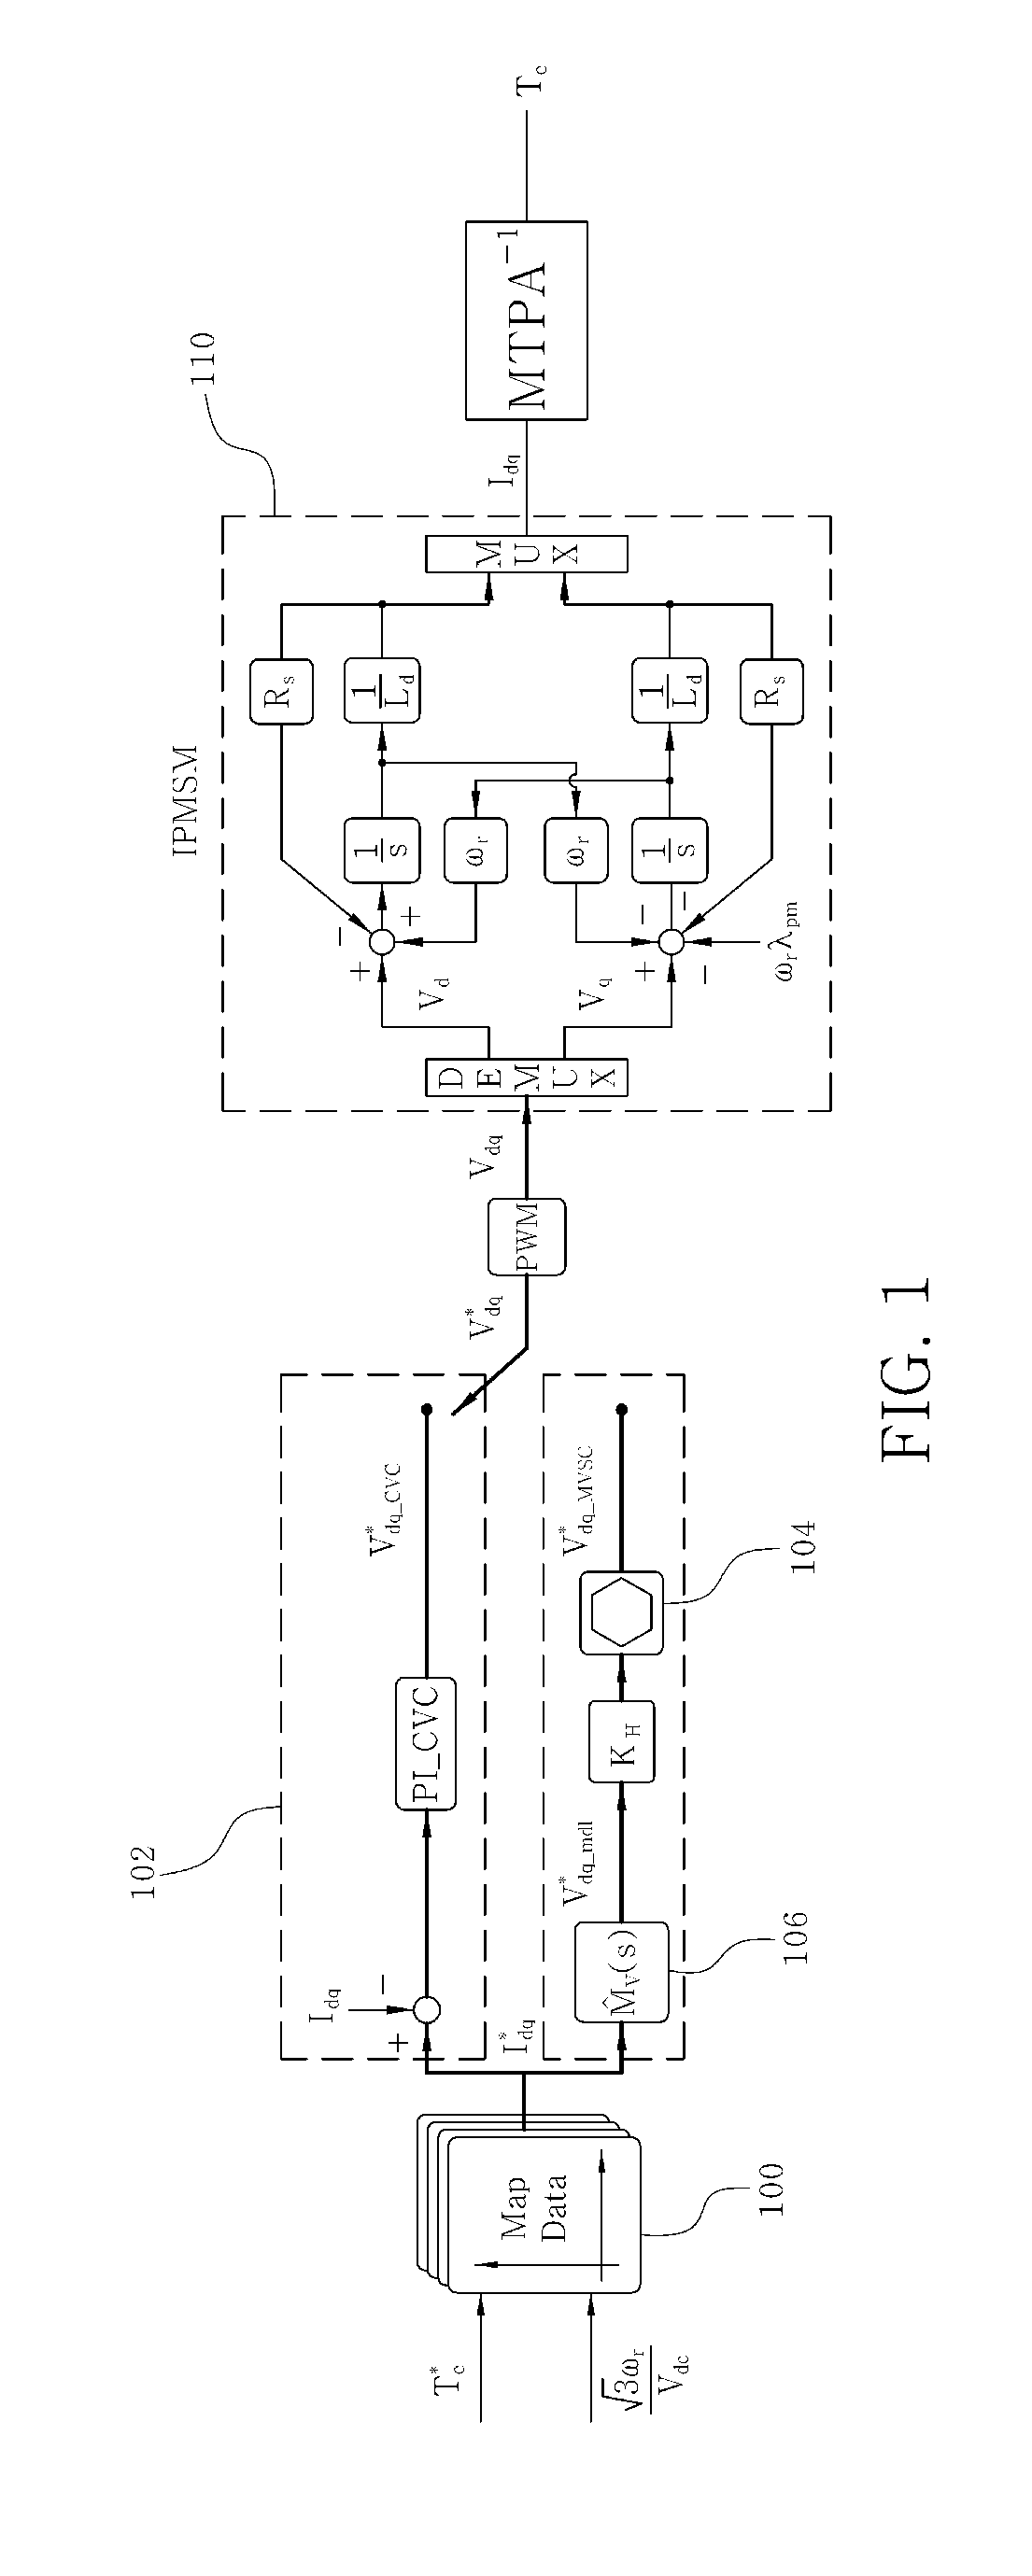 Method for controlling interior permanent magnet synchronous motor